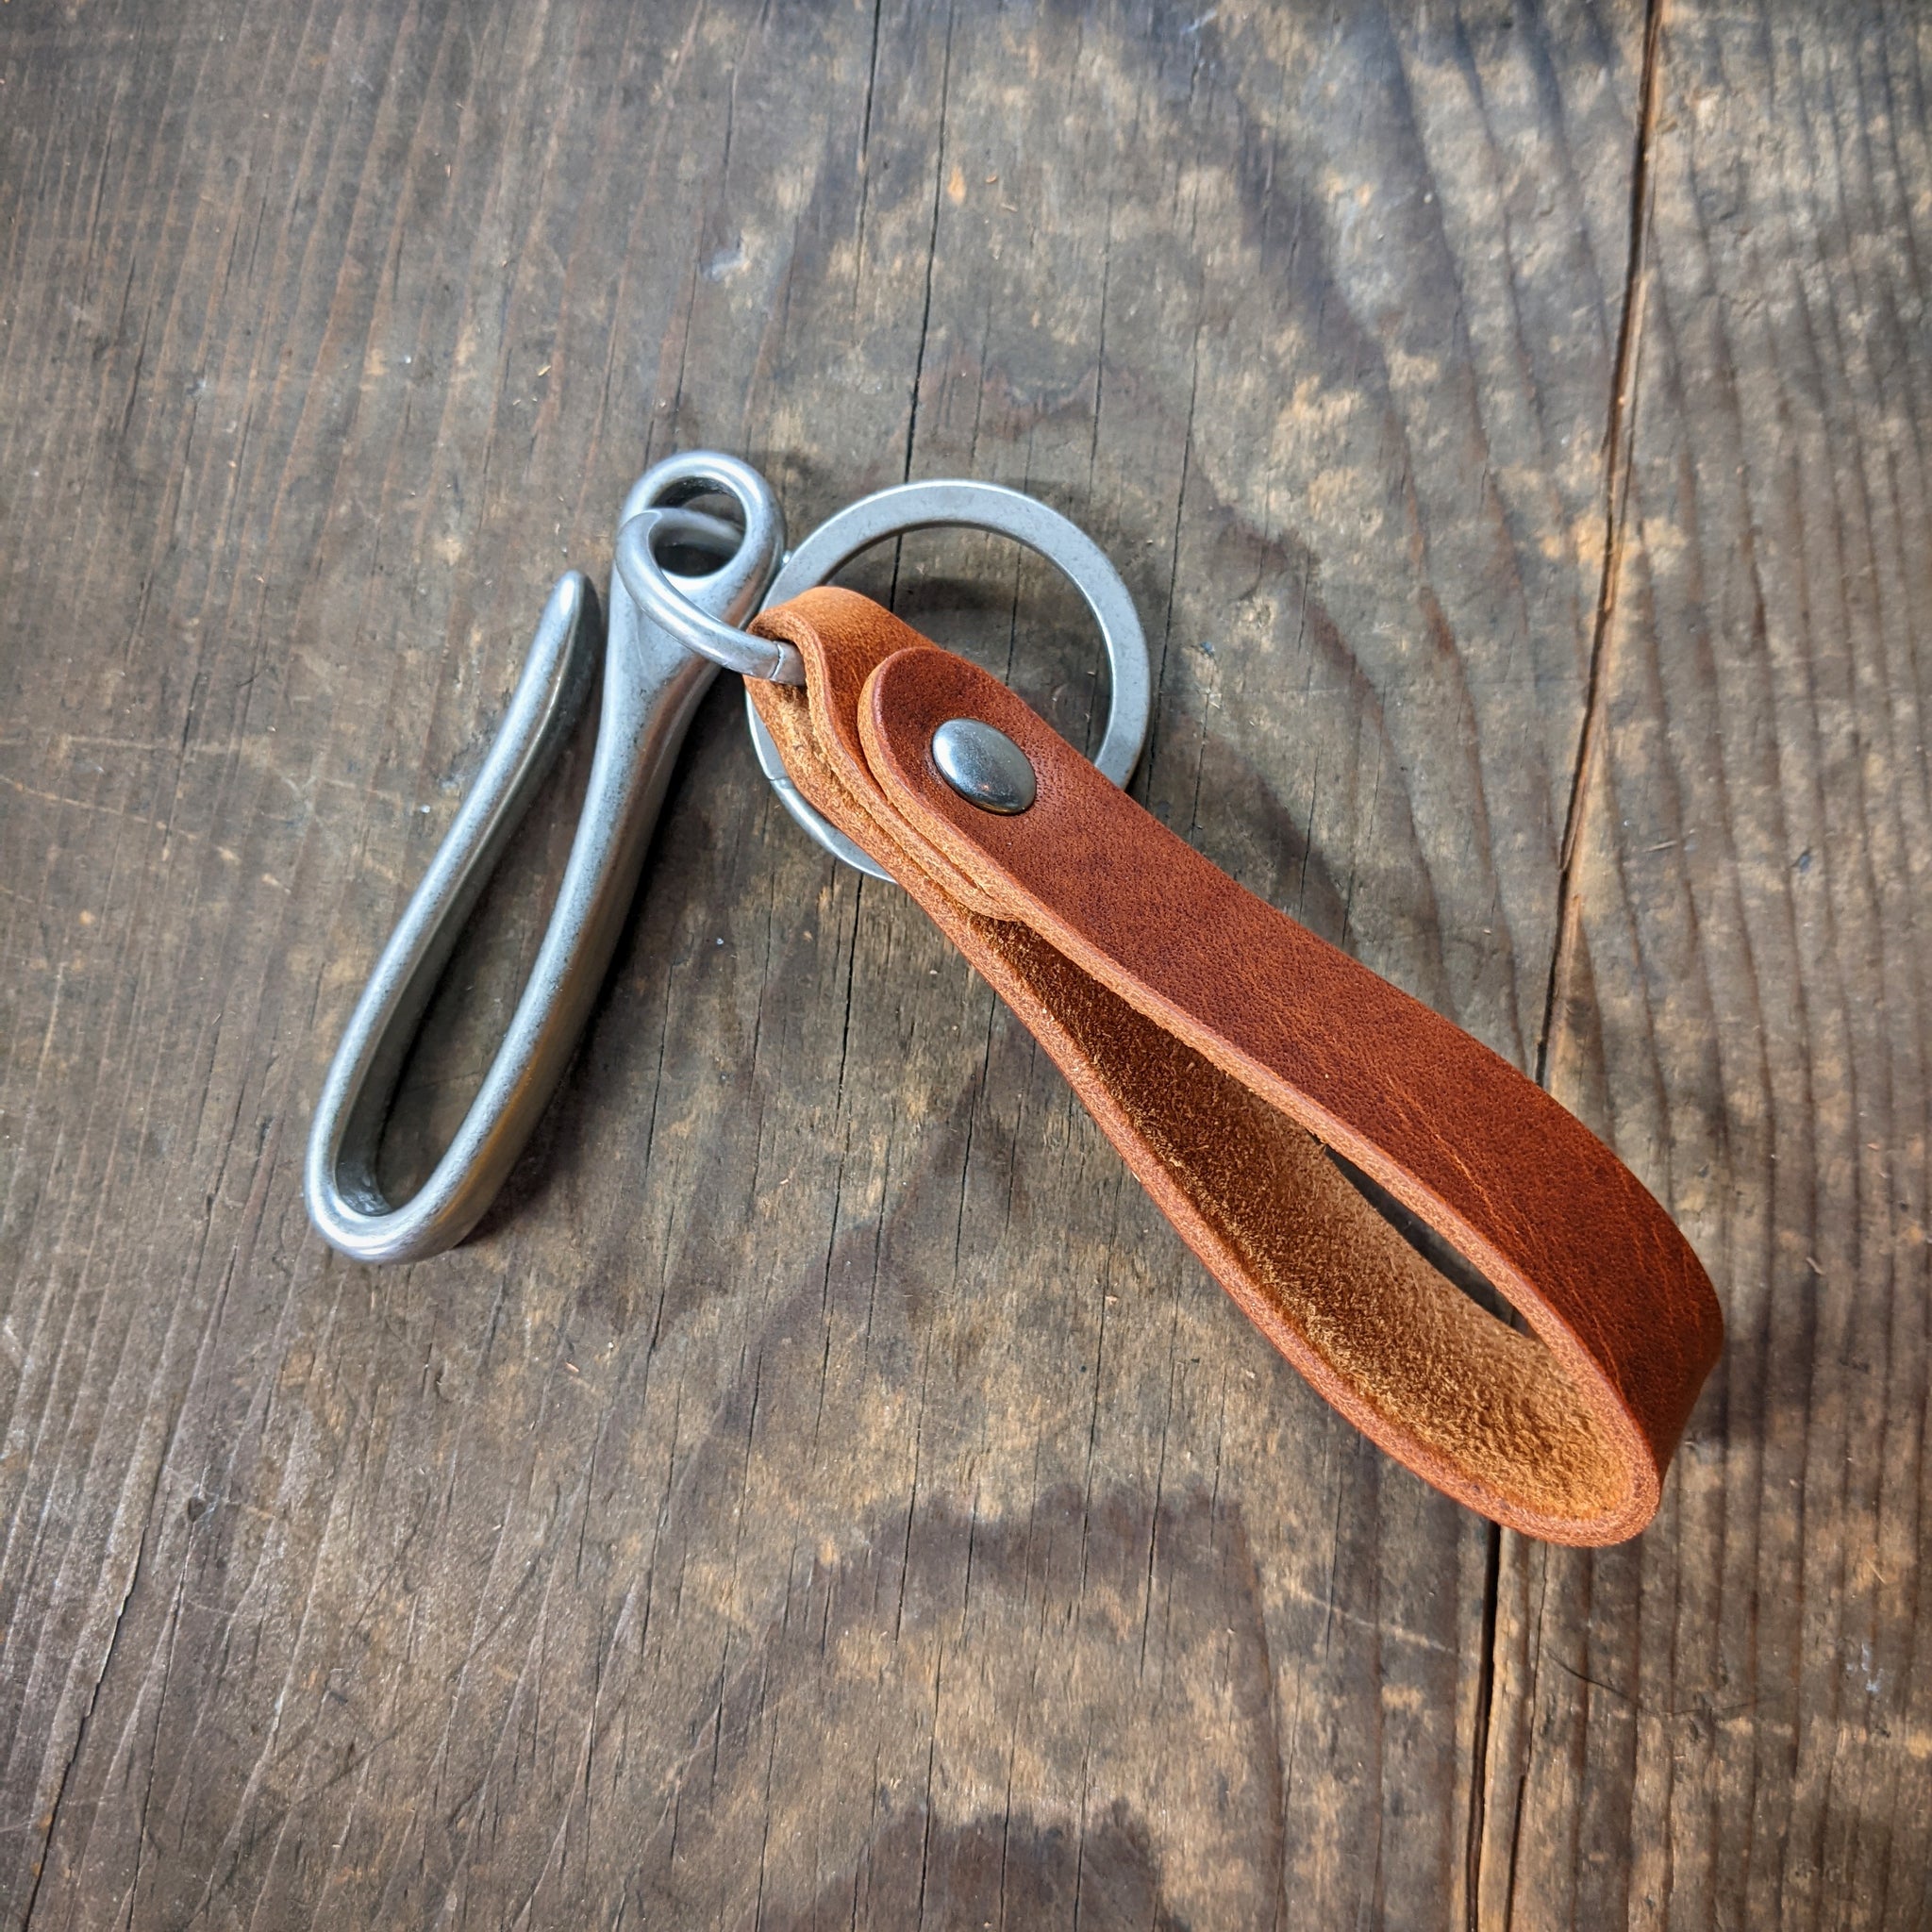 Caliber Leather Company Spring Mount - Japanese Fish Hook Personalized Horween Leather Keychain Gun Metal / English Tan